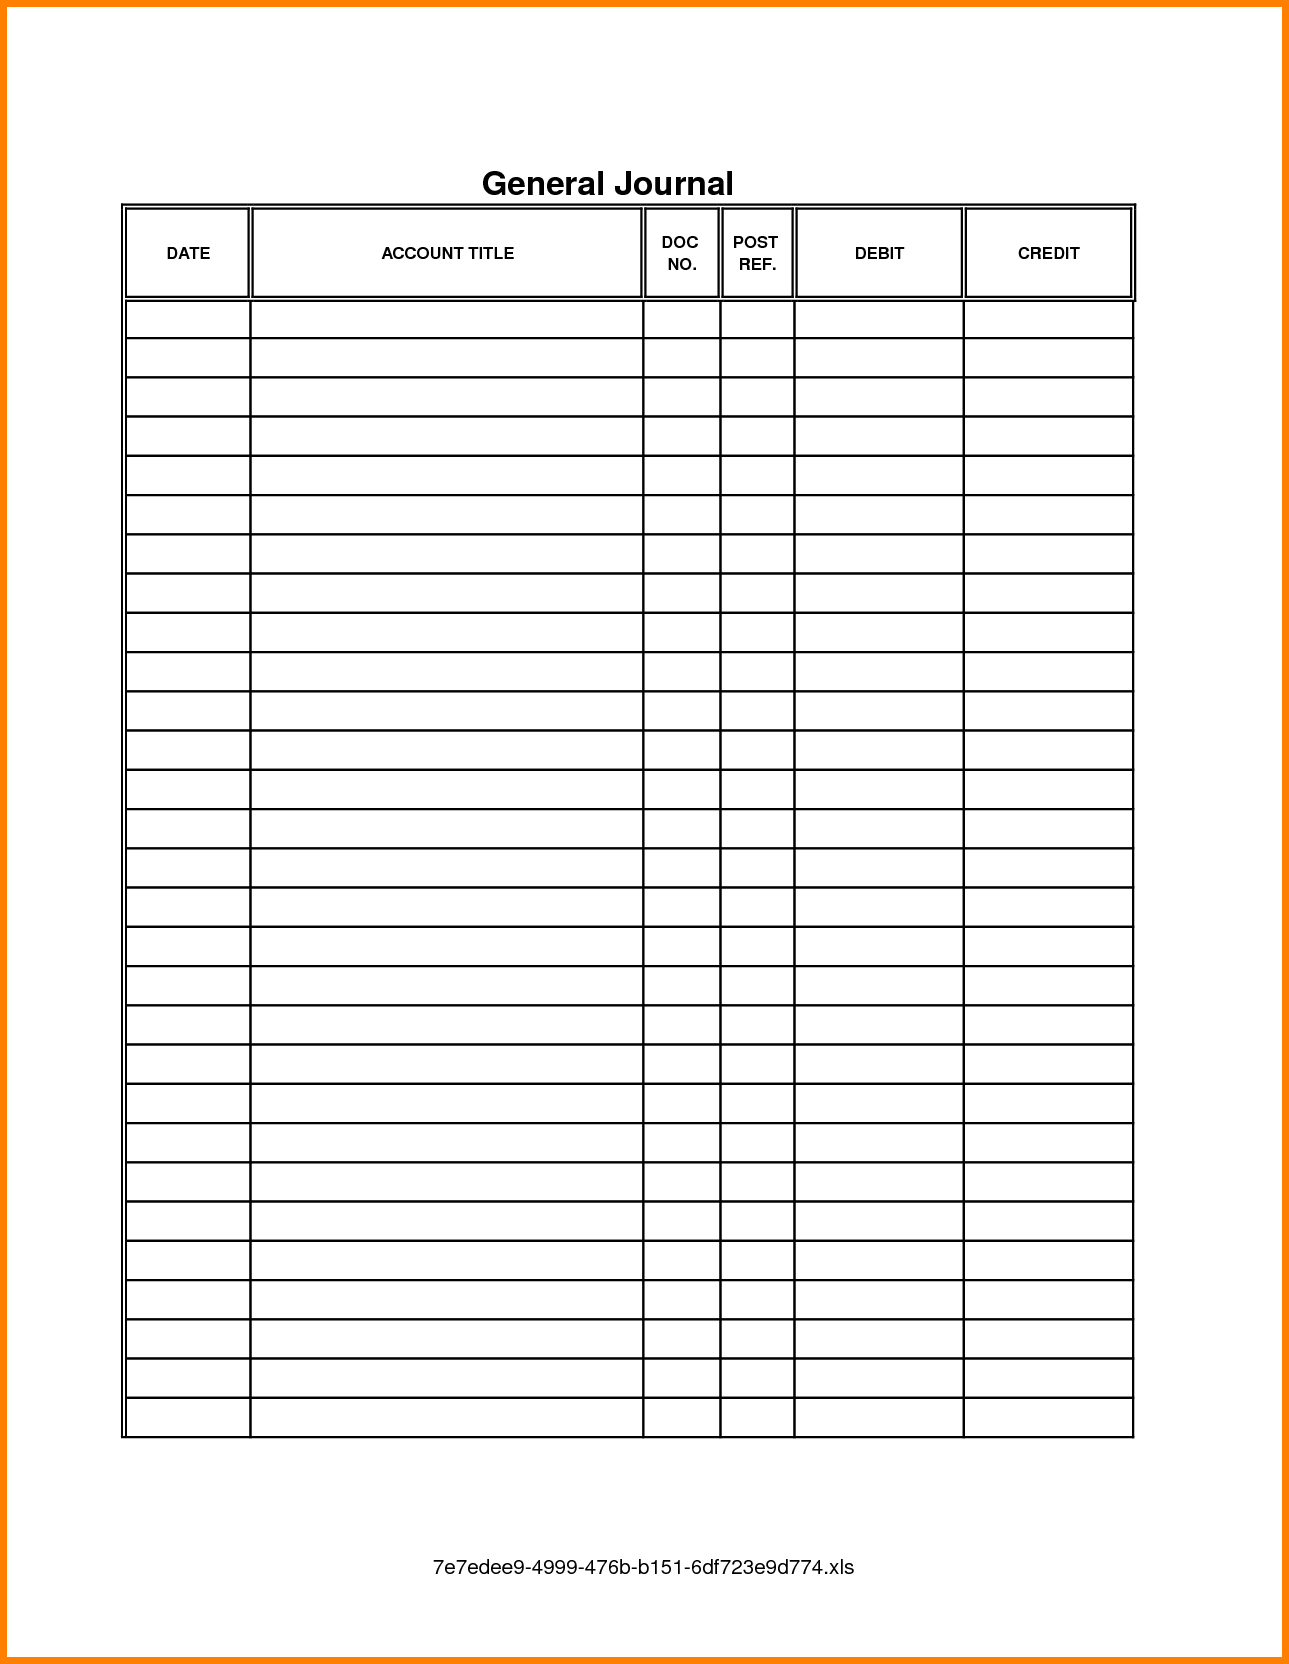 012 Template Ideas General Journal Ledger Accounting With Double Entry Journal Template For Word